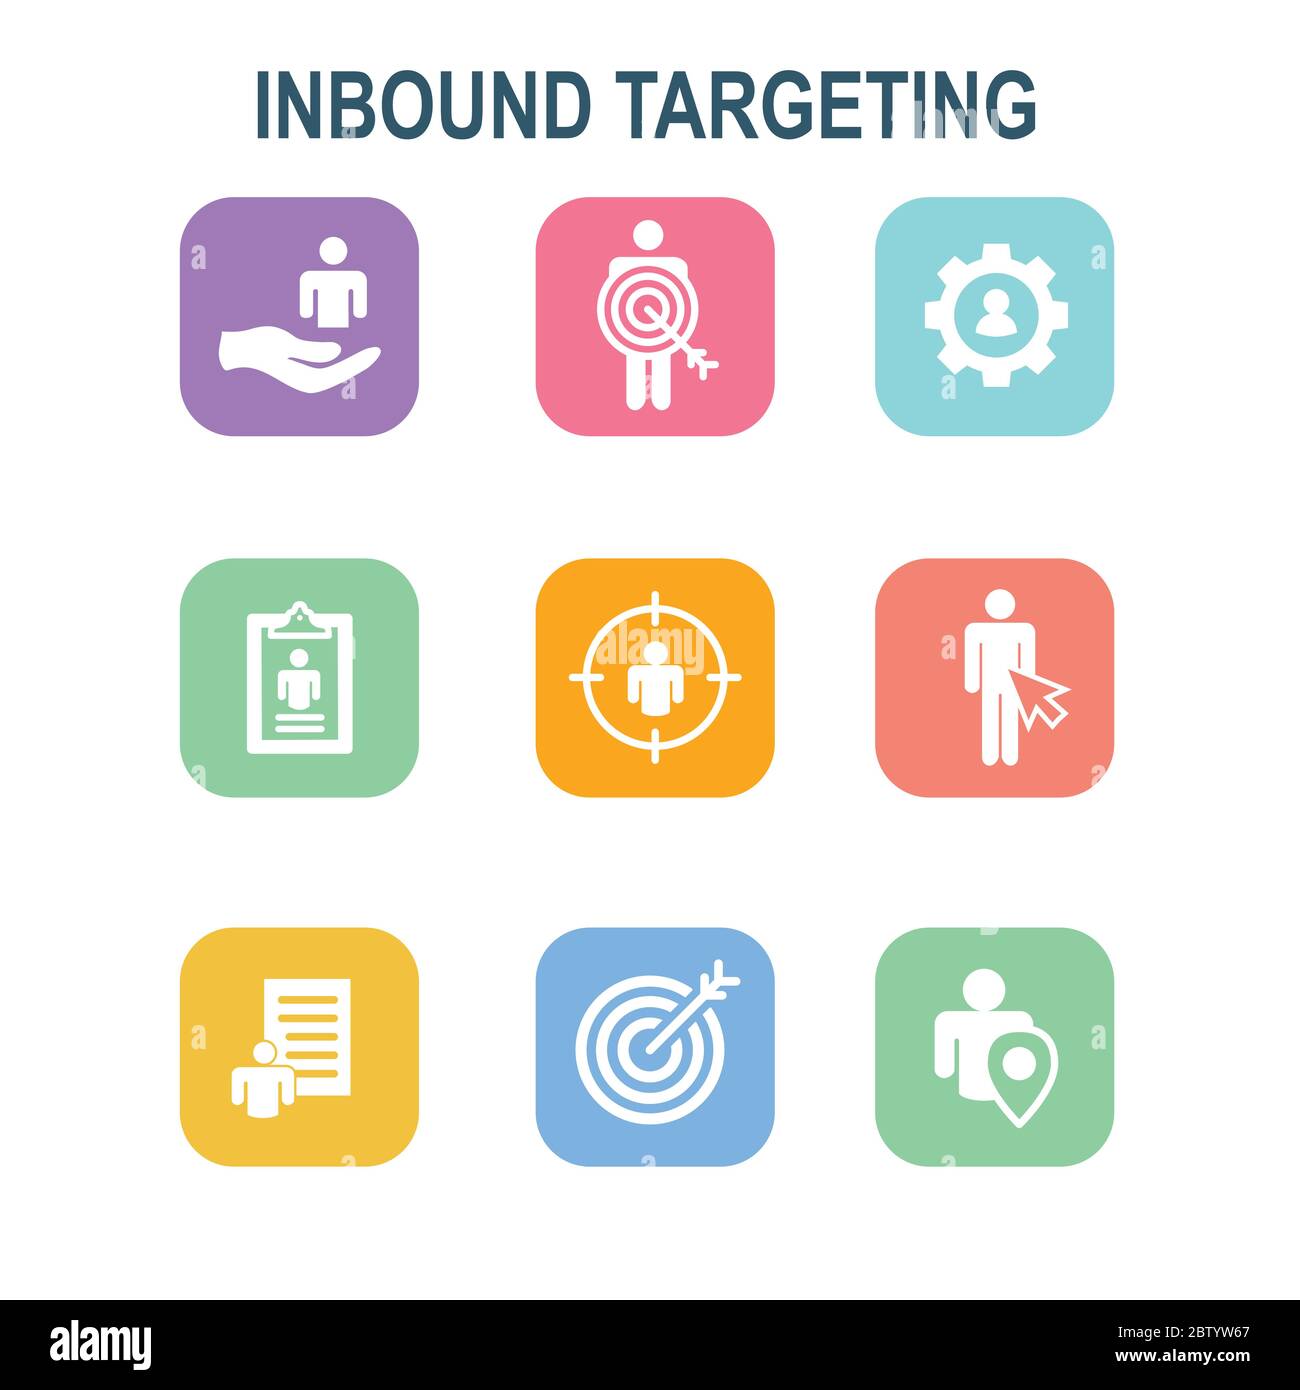 Inbound Marketing Icons w targeting imagery to show buyers and customers Stock Vector